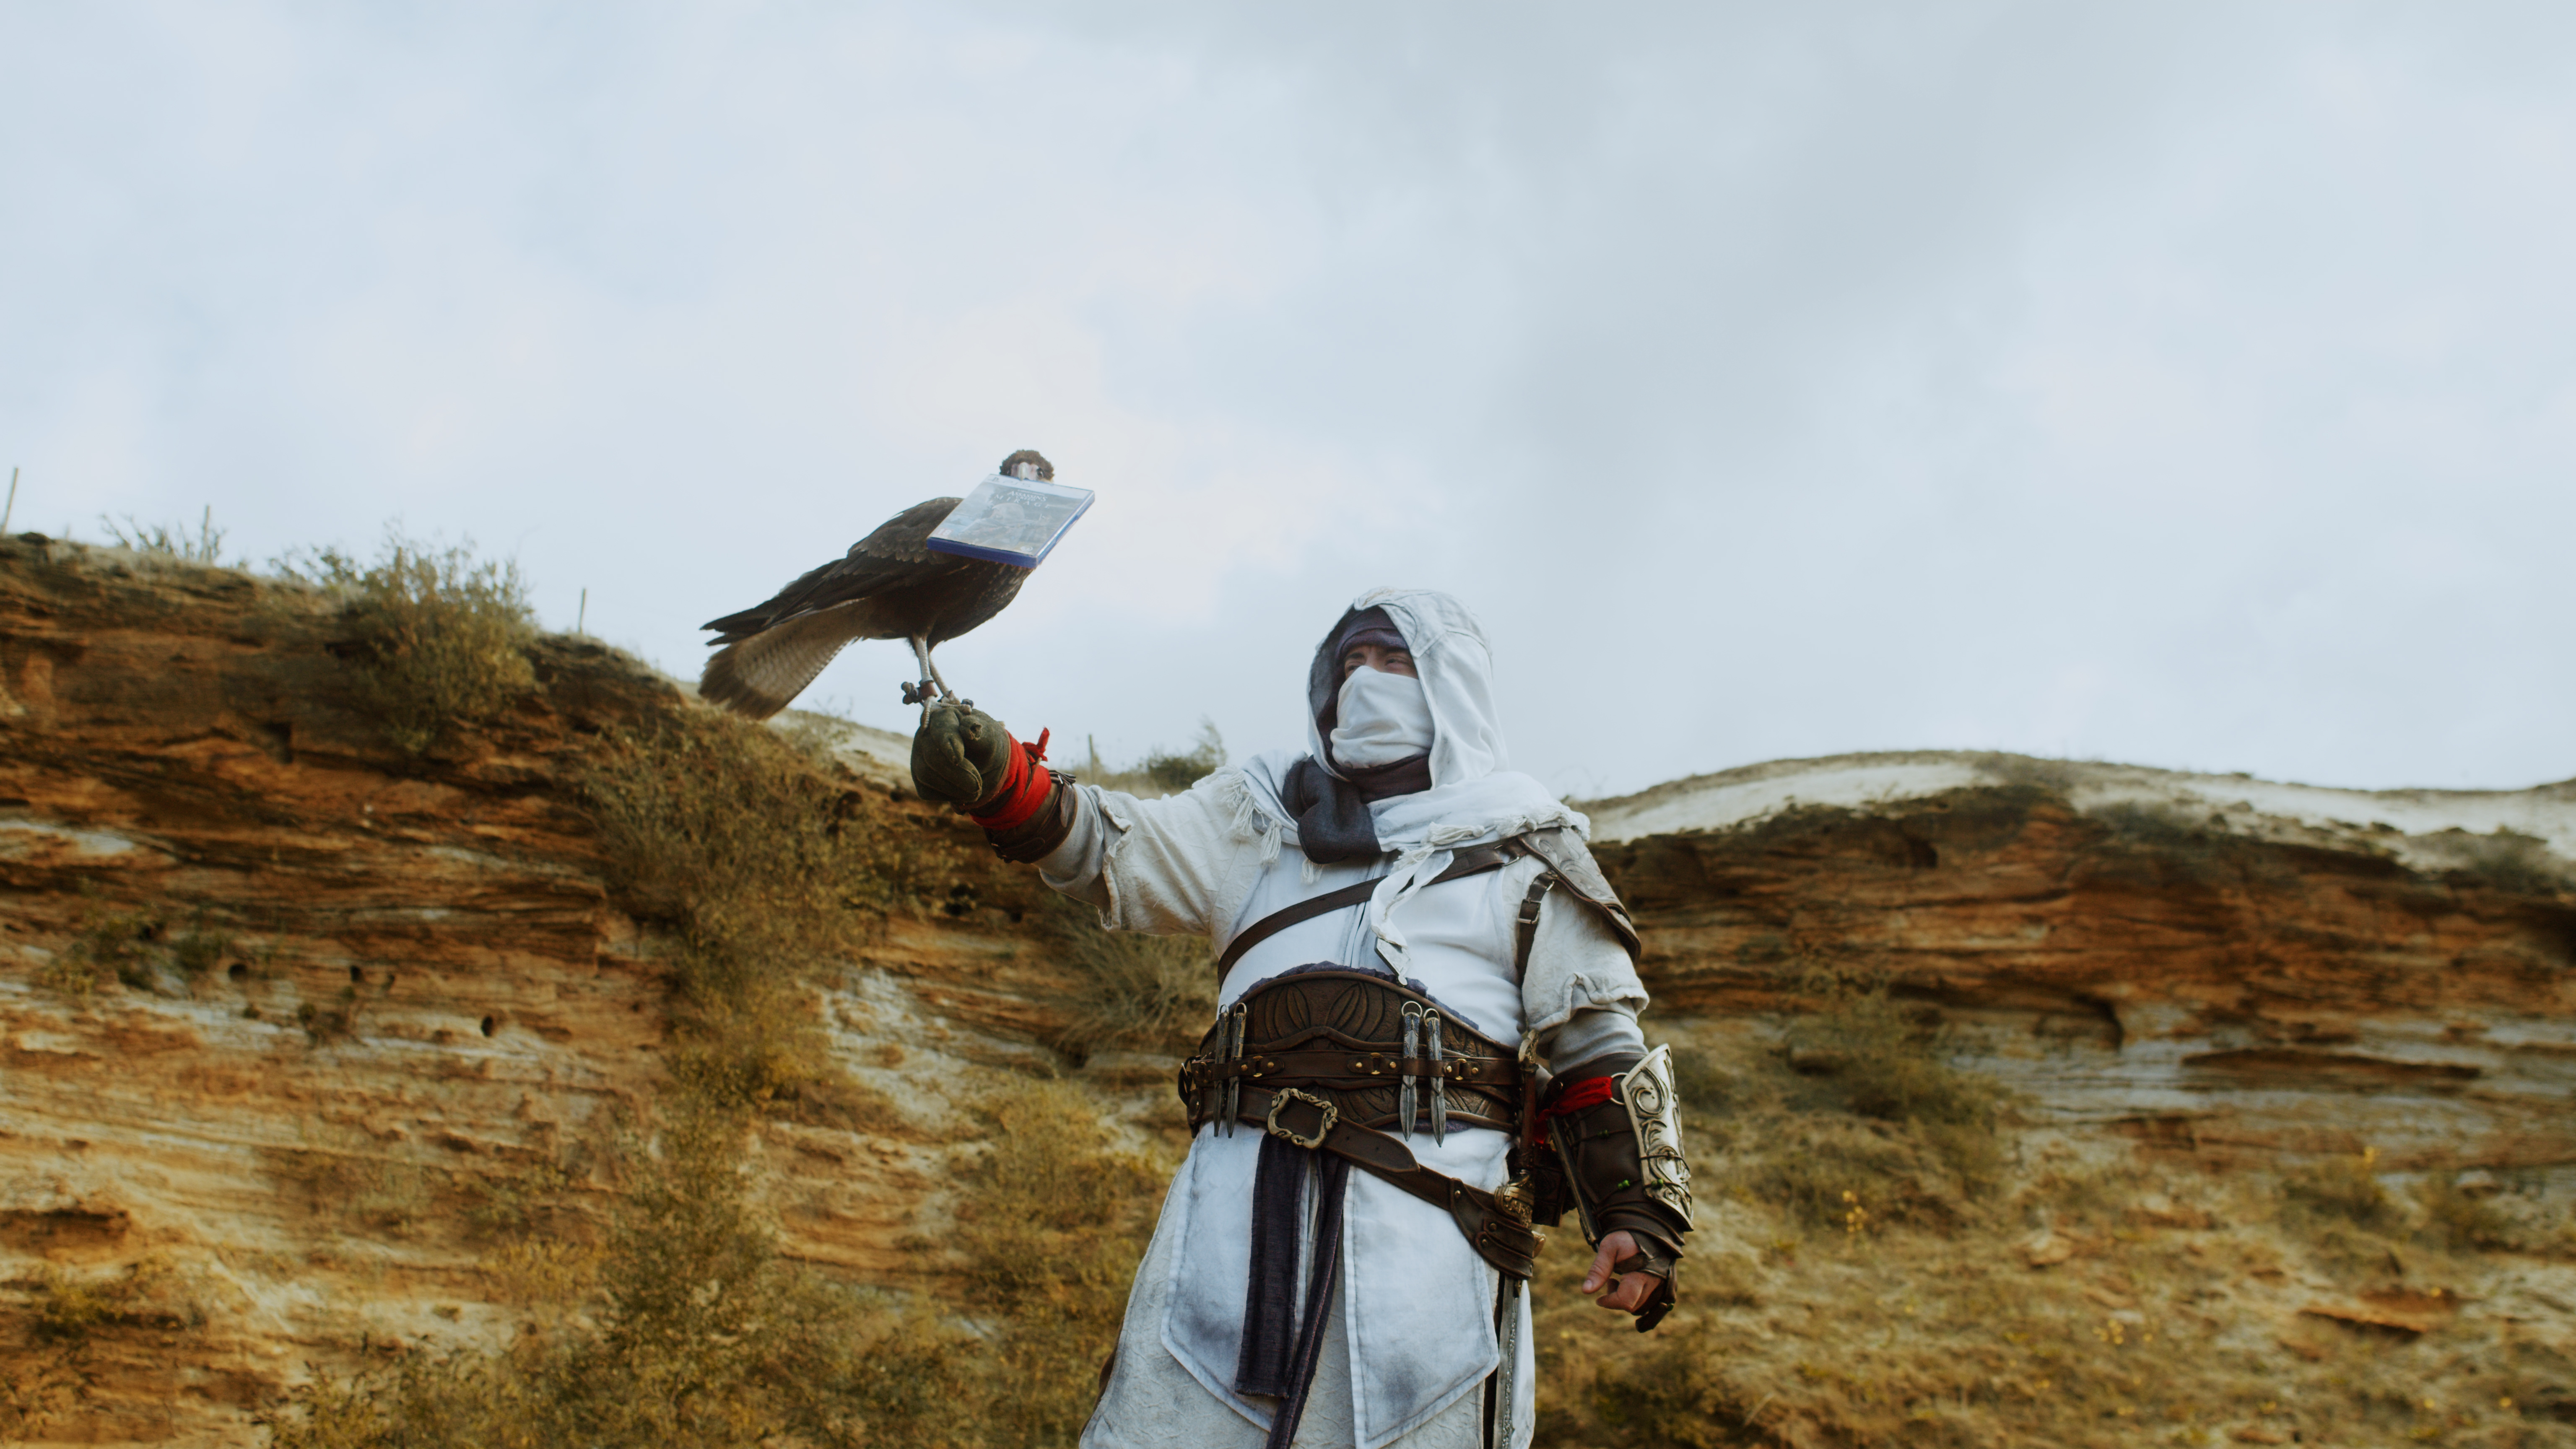 A man with a bird holding a copy of Assassin's Creed.